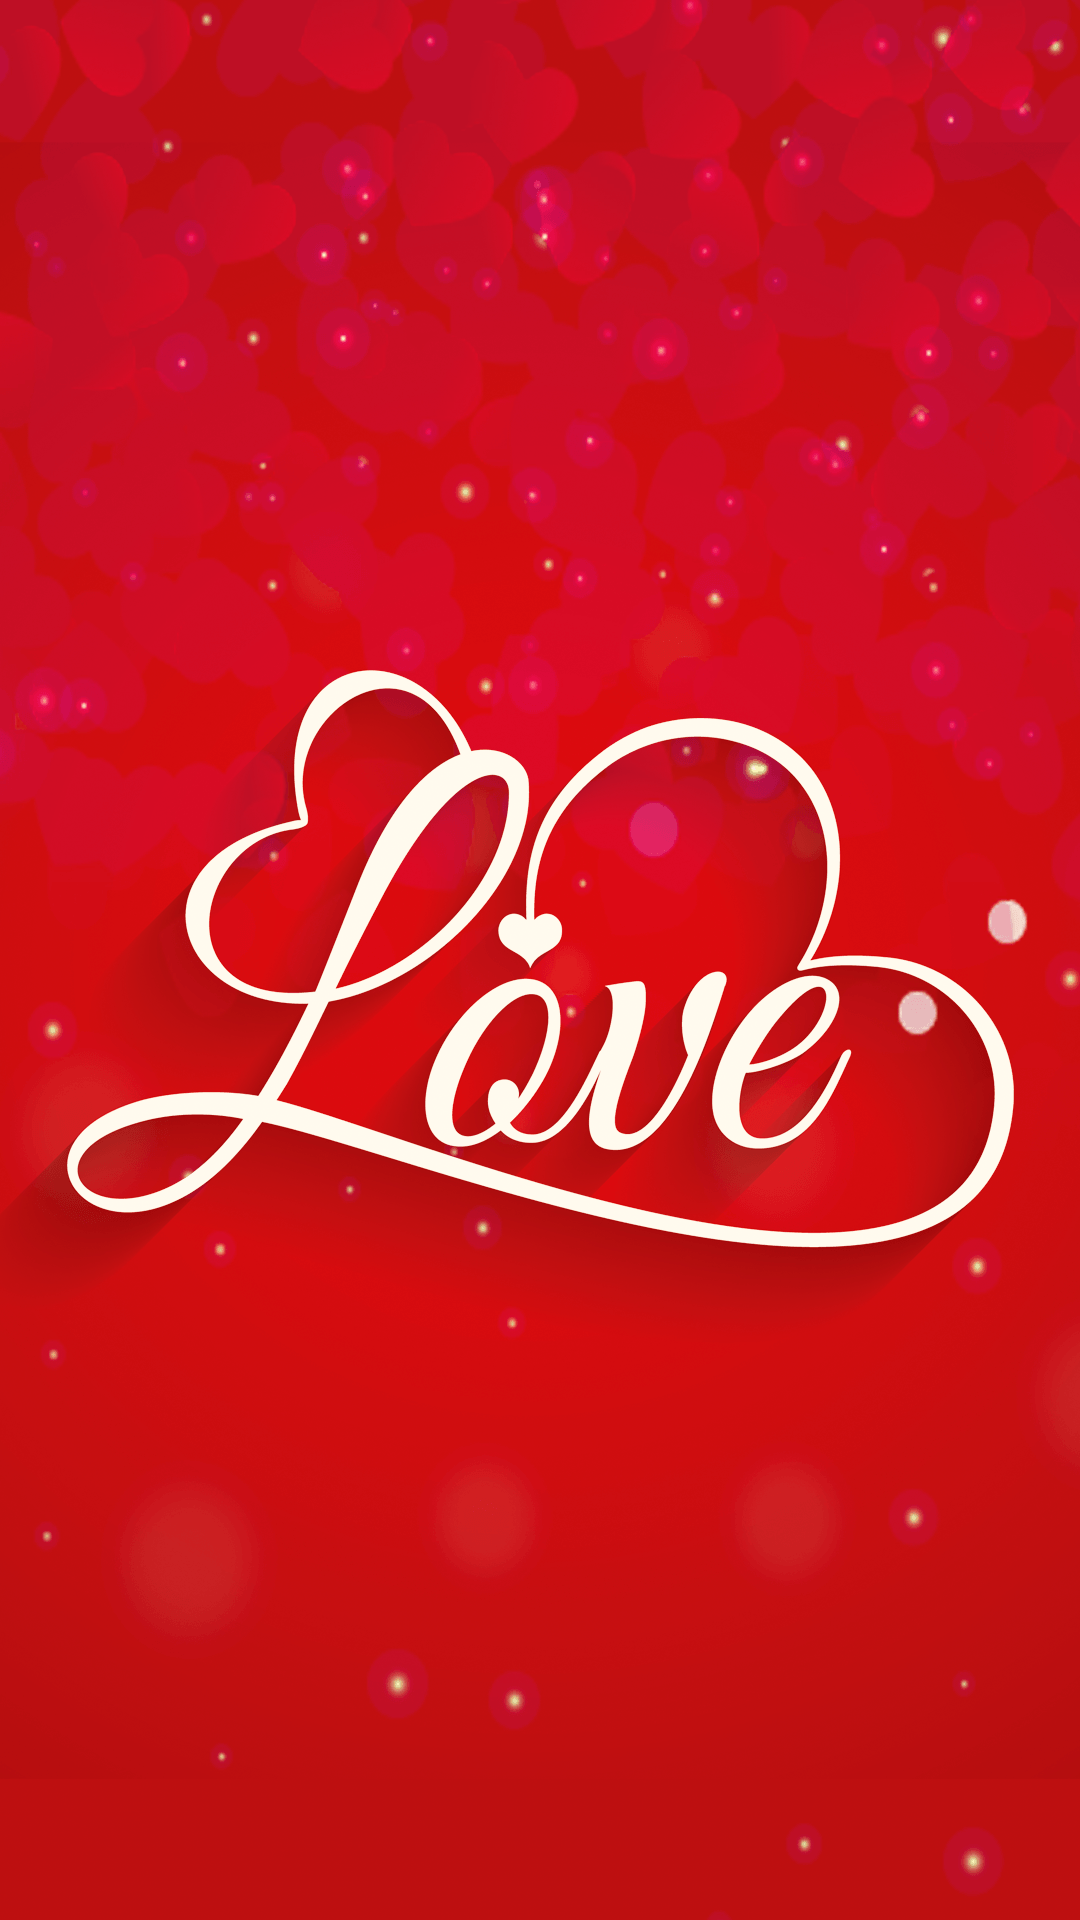 Ultra HD Red Love Wallpaper For Your Mobile Phone .0496